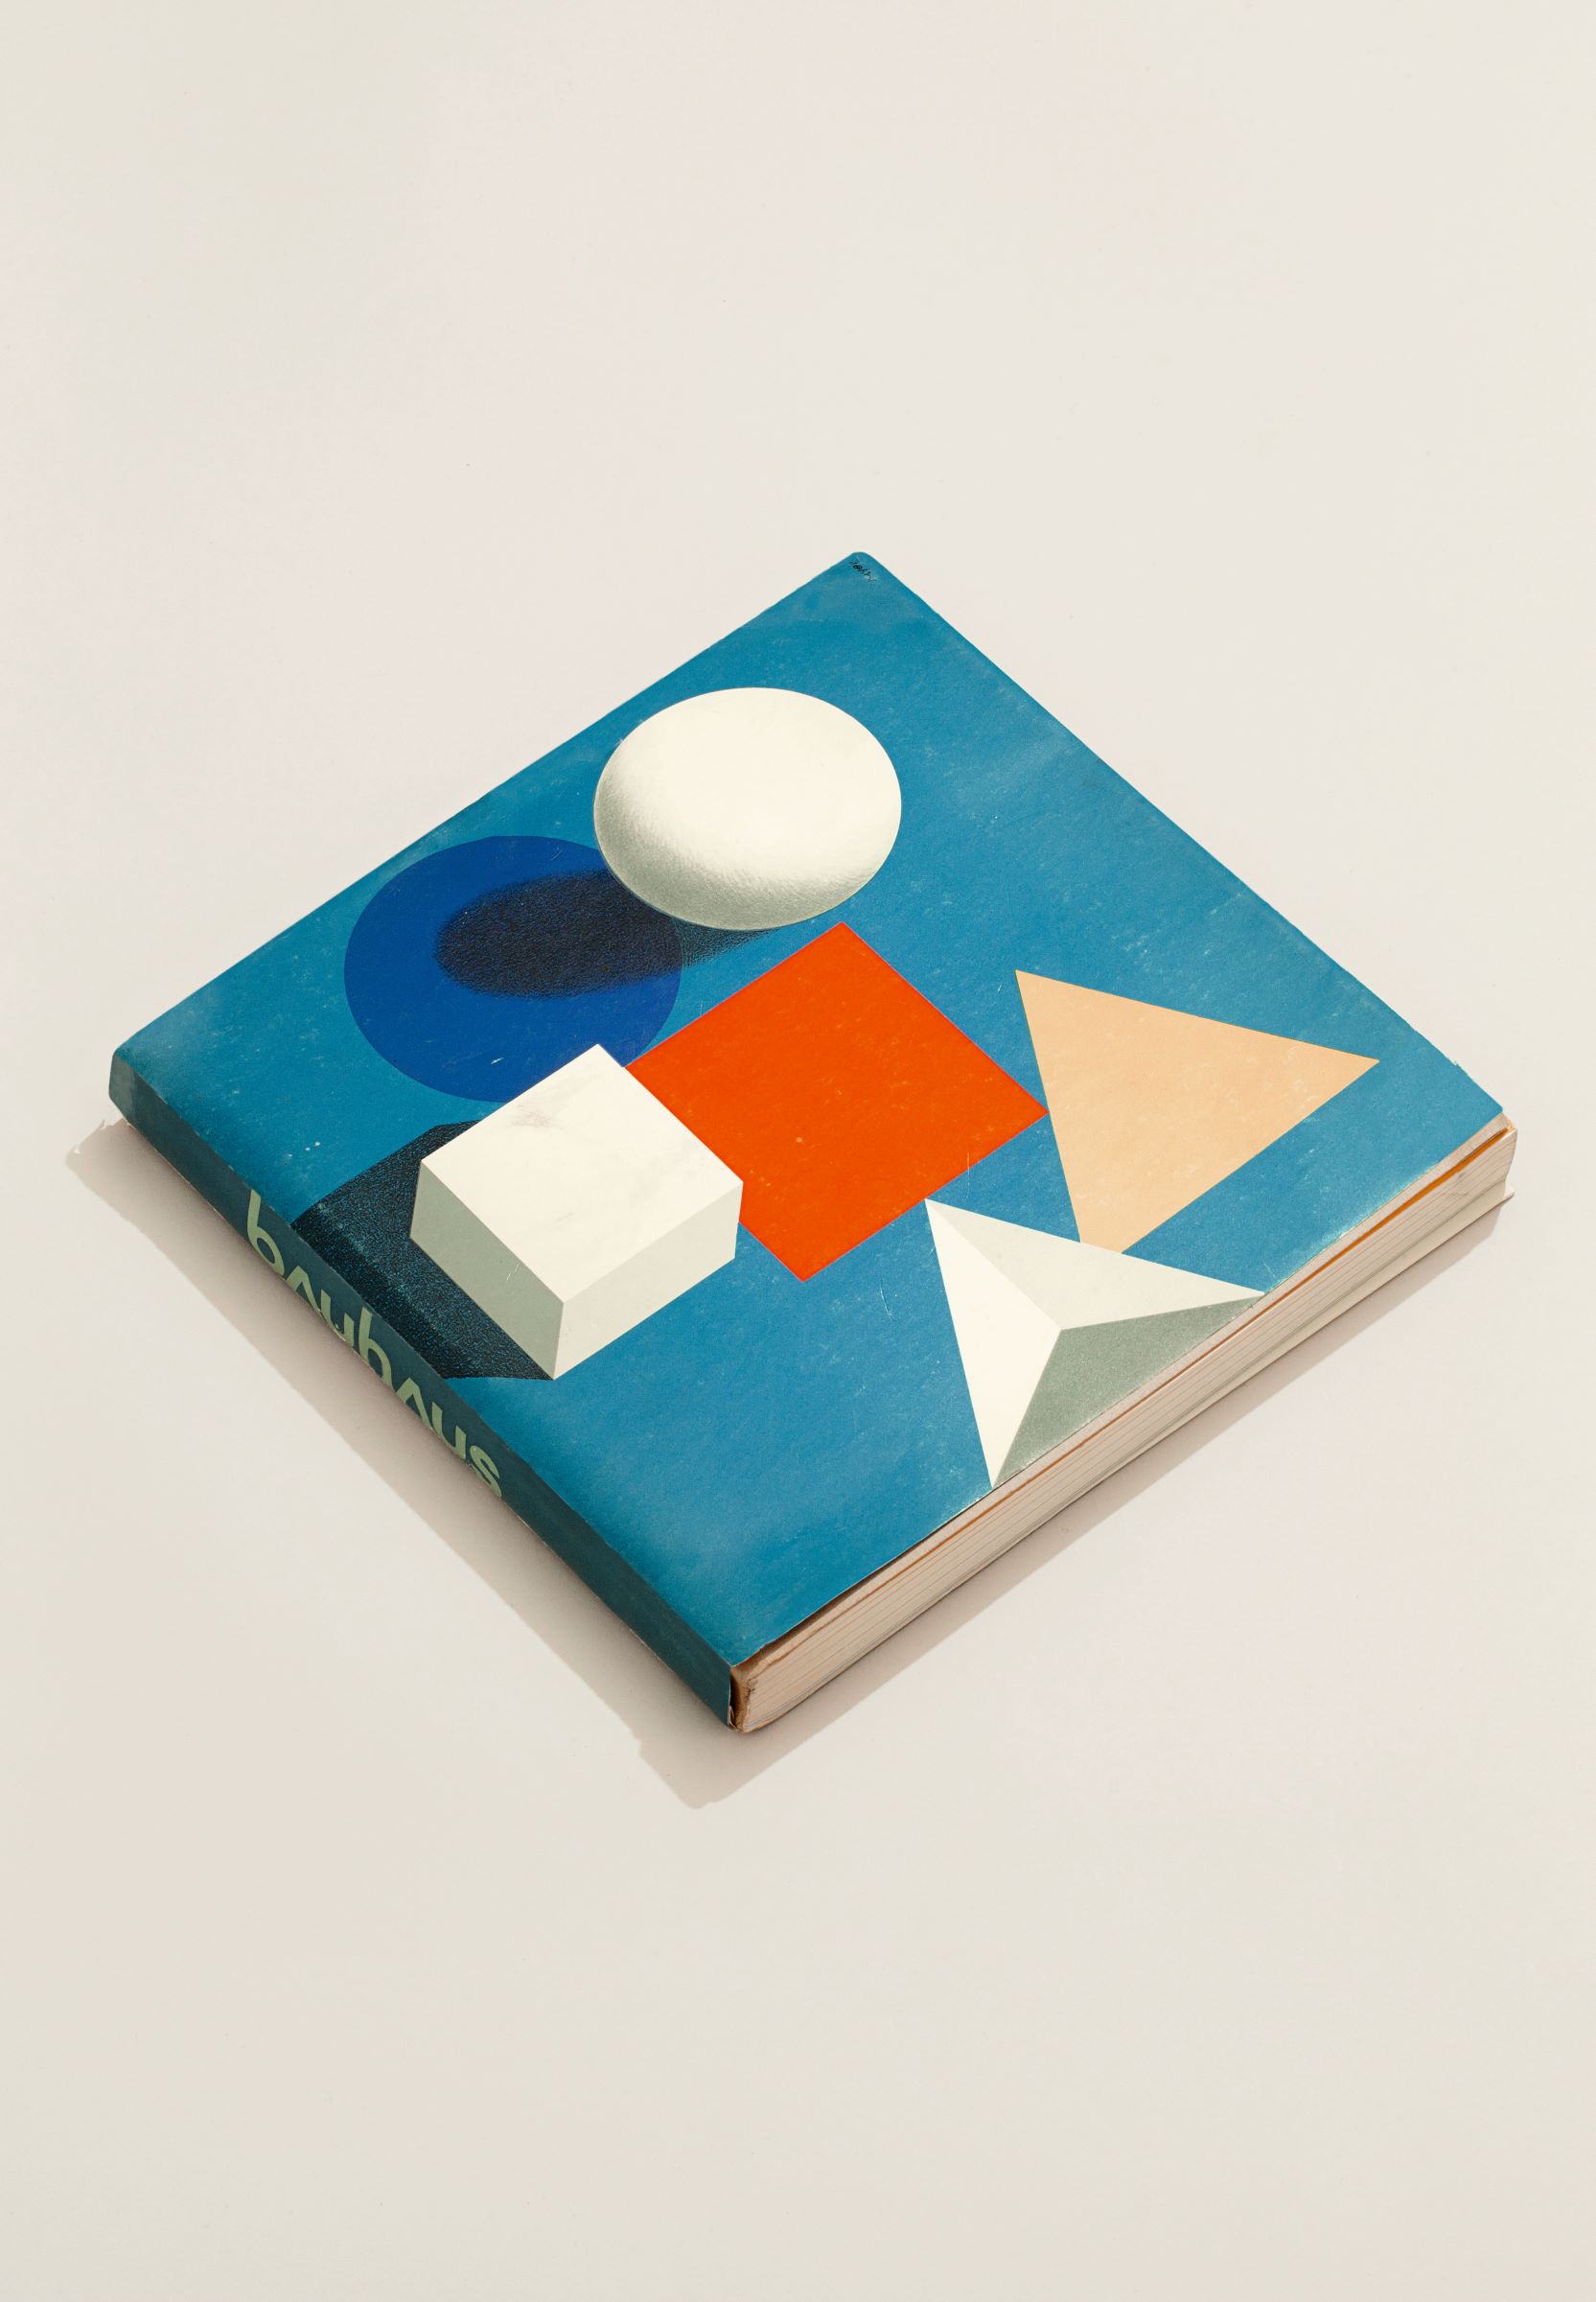 Paul Smith's Bauhaus book, published by the Royal Academy, 1968